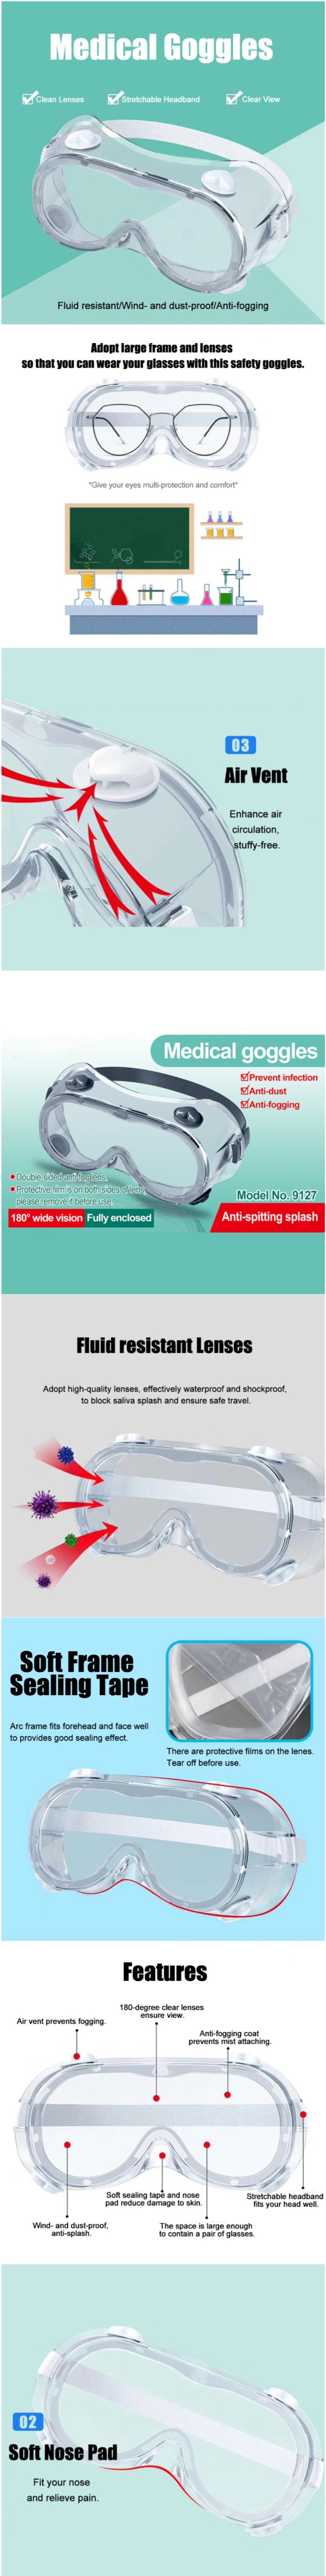 Medical Goggles , Hospital Goggles , Doctor Goggles , Disposable Goggles , Safety Goggles , Anti-Fogging Goggles , Anti-Splash Goggles , Anti-dust Goggles , Prevent Infection Goggles ,